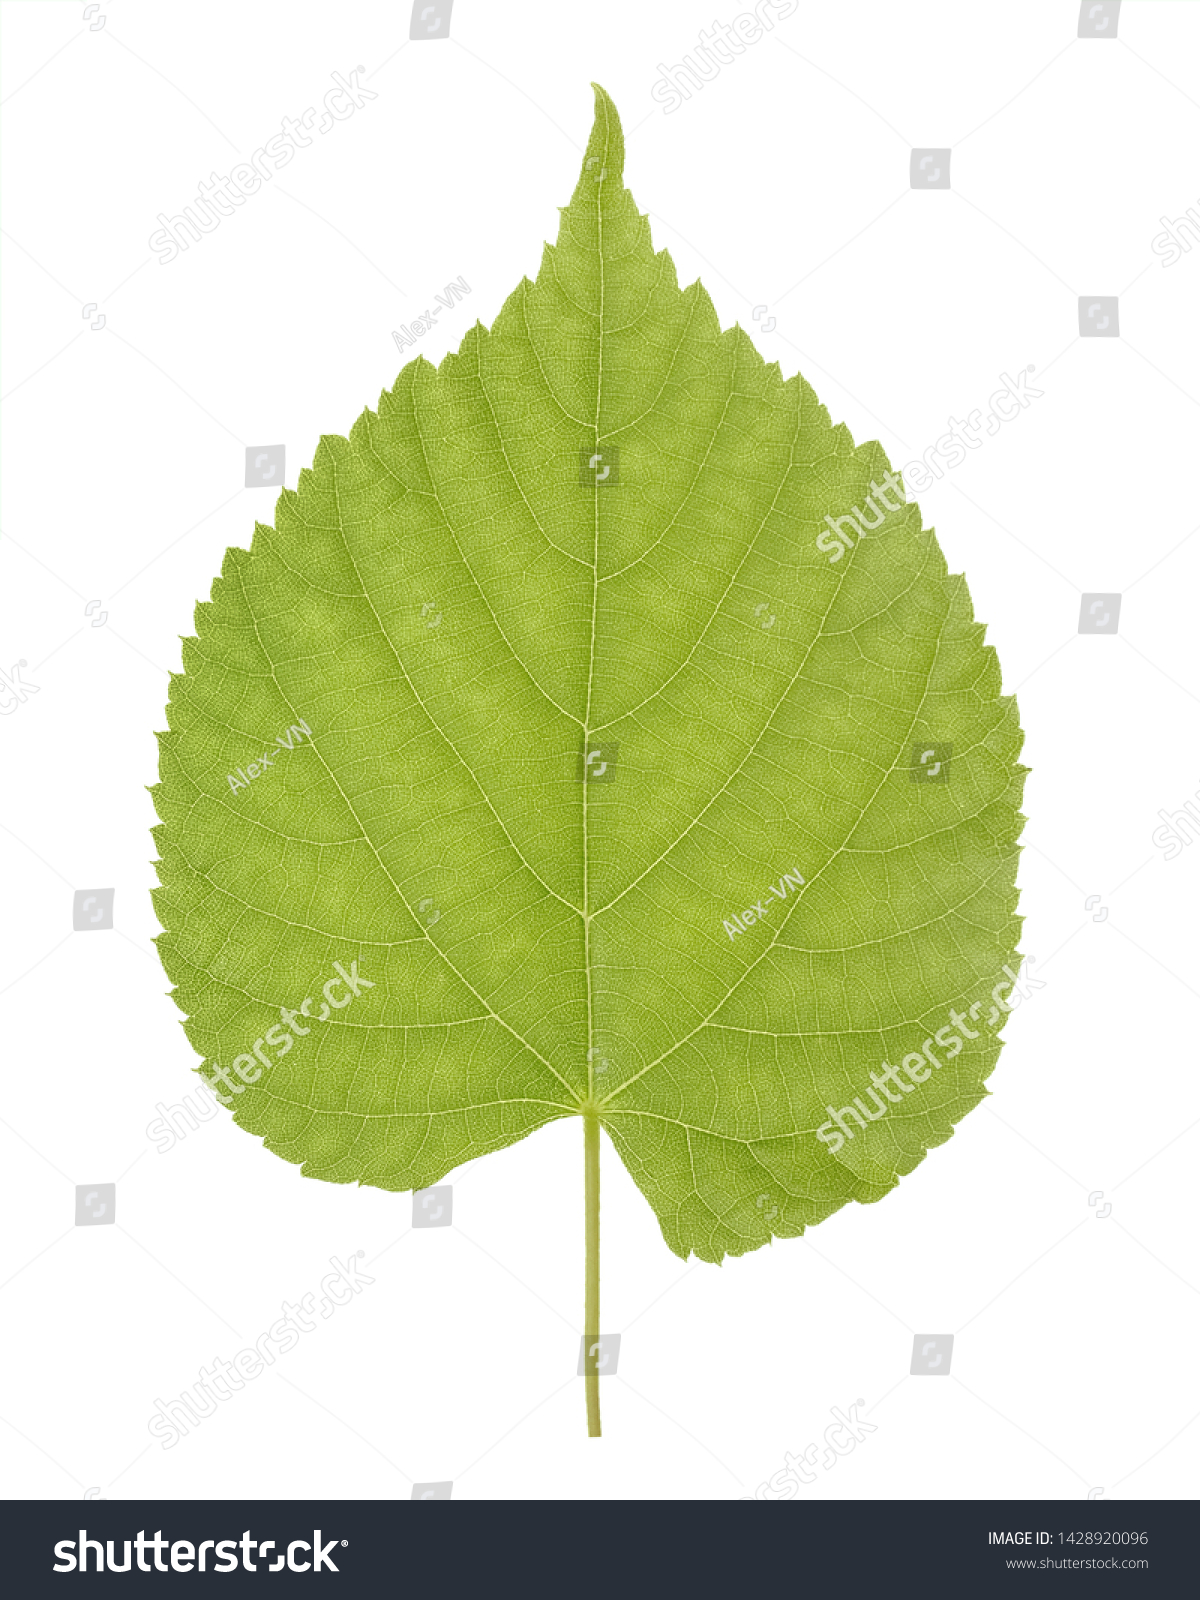 Green leaf of Linden or Tilia, commonly called lime trees, or lime bushes of the family Tiliaceae or Malvaceae isolated on white background. #1428920096